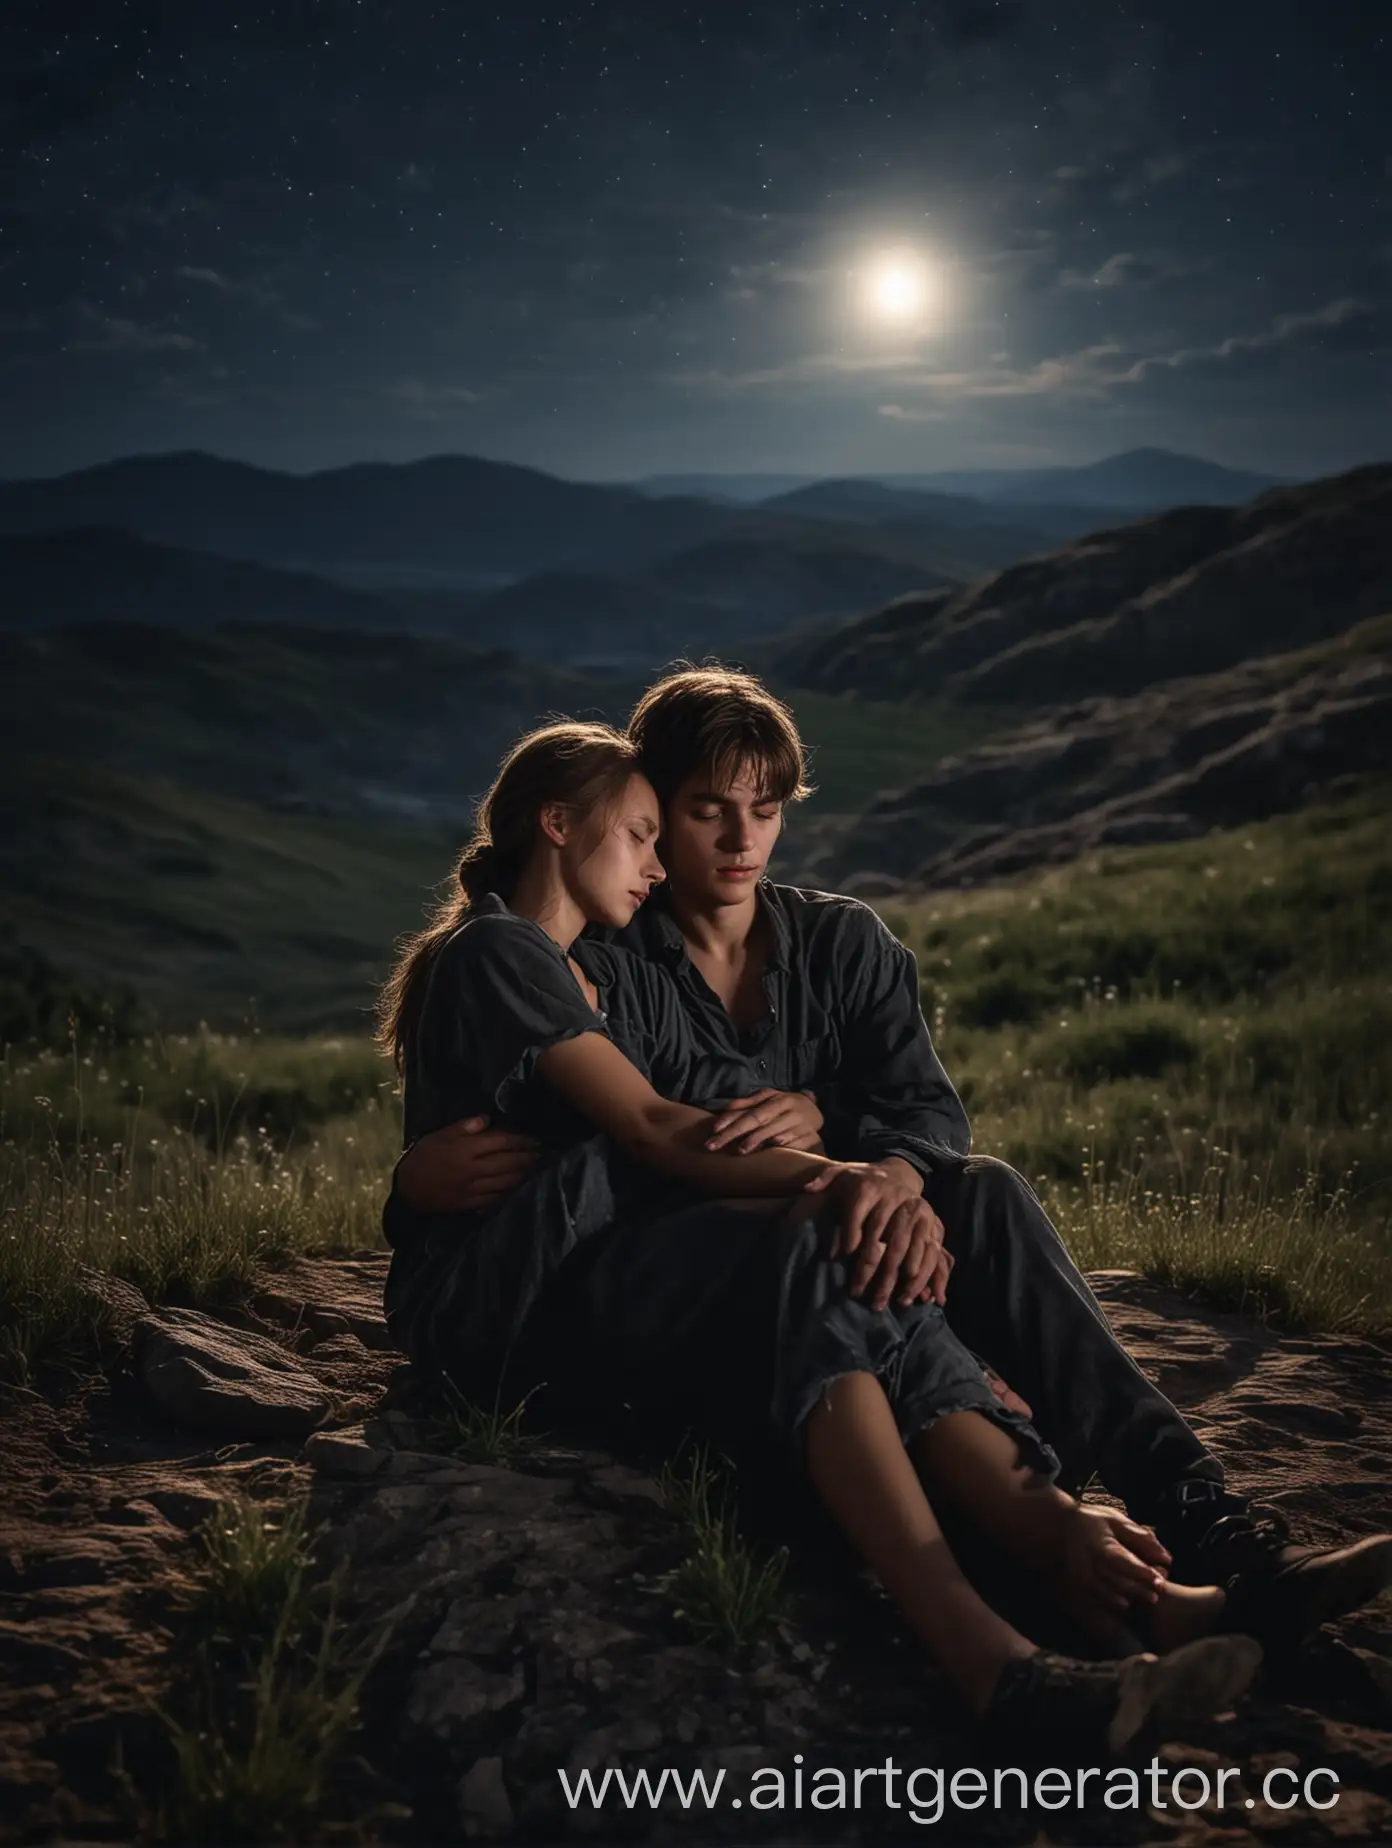 Embracing-Couple-on-Mountain-Slope-at-Night